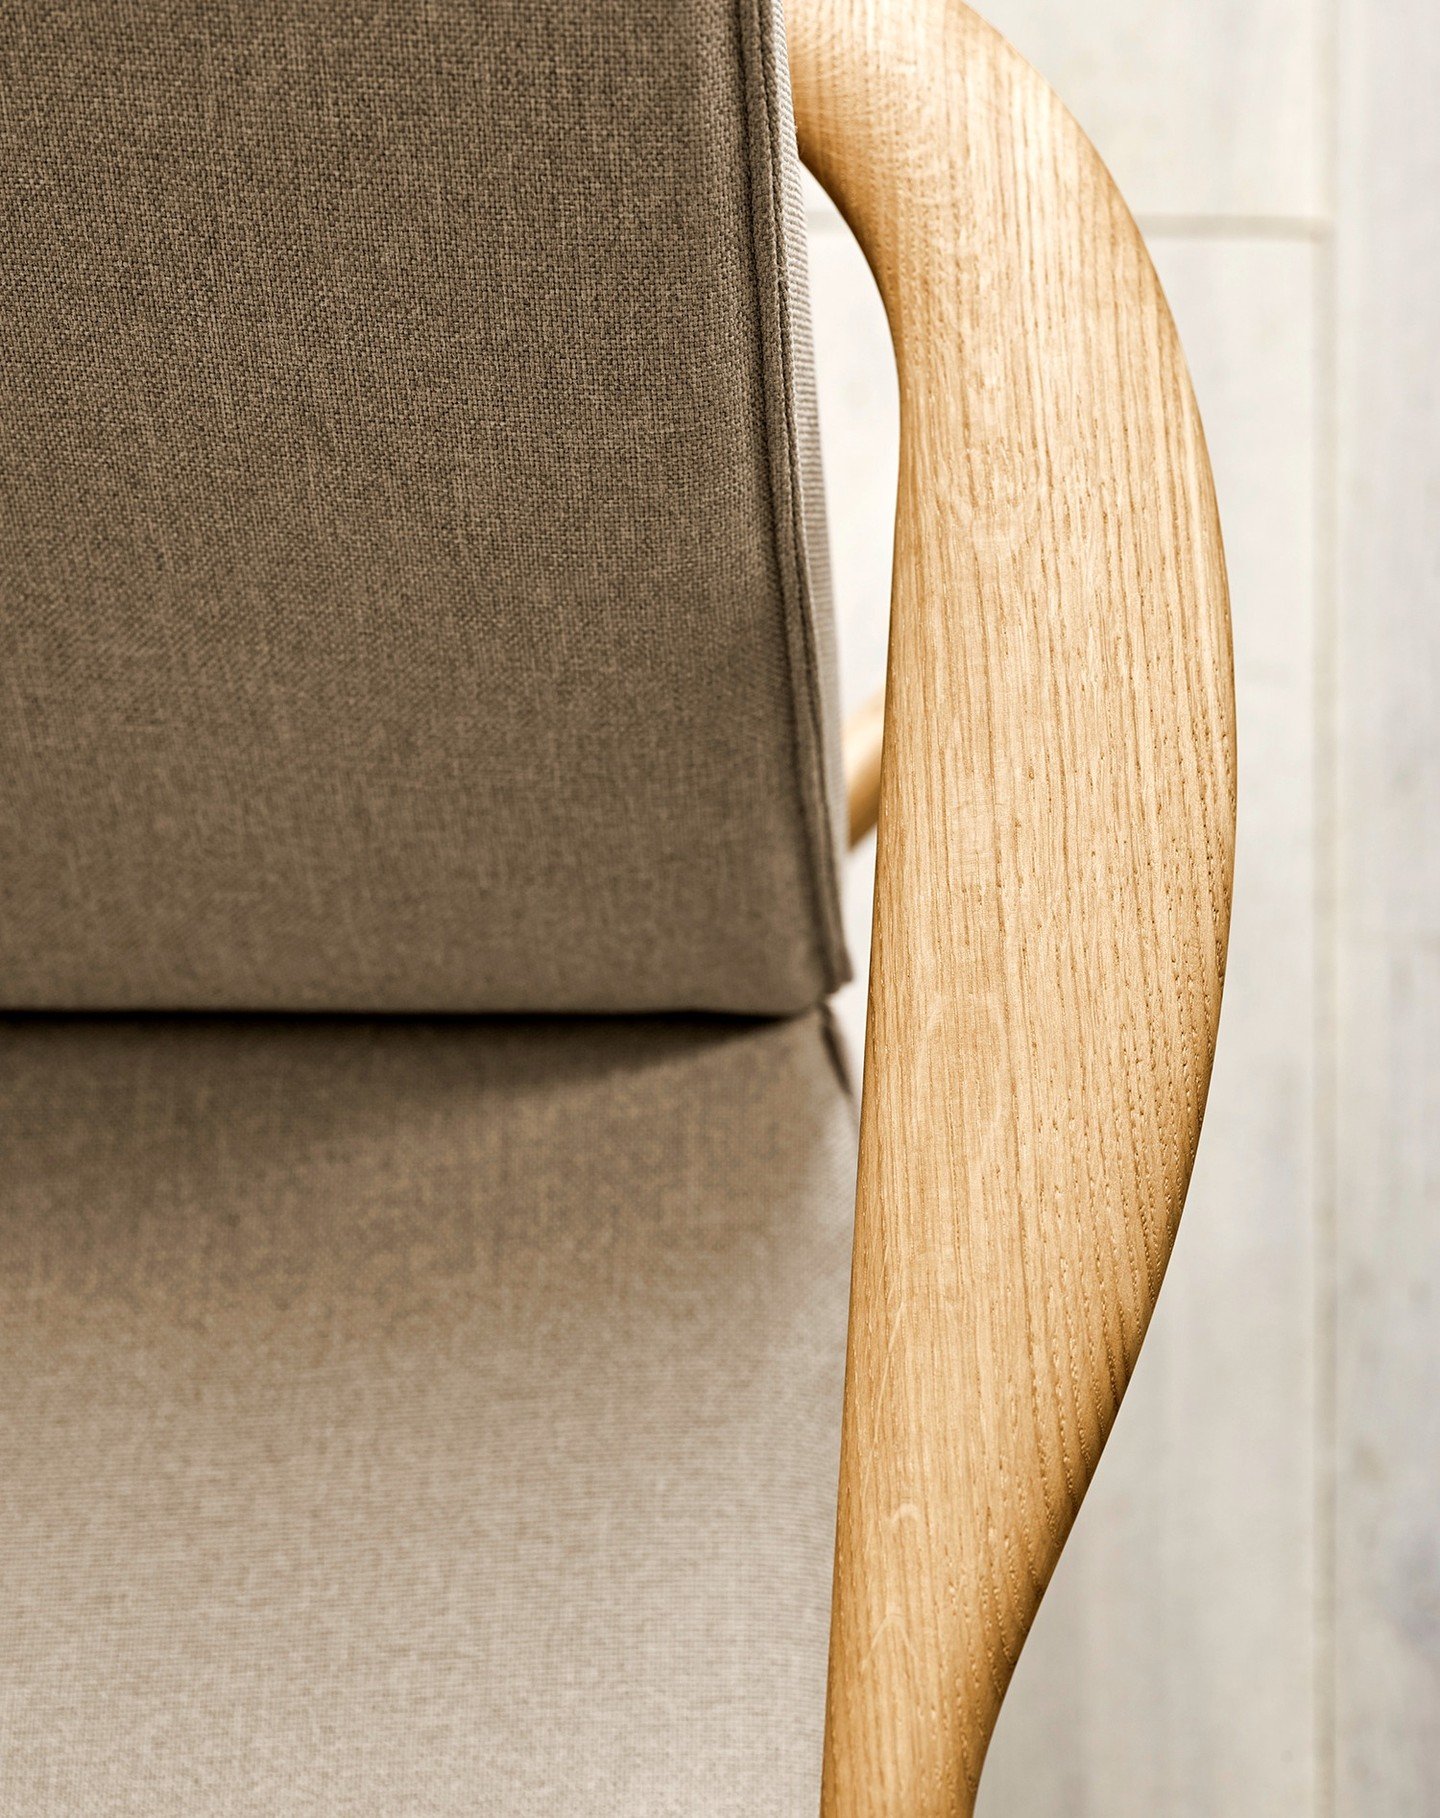 It's all in the details!

A coule of details of the armrest on the new Bowie armchair that we designed for @boliacom 

#skrivo #bolia #boliacom #armchair #scandinaviandesign #danishdesign #oakfurniture #woodworking #l&aelig;nestol #furnituredesign #o